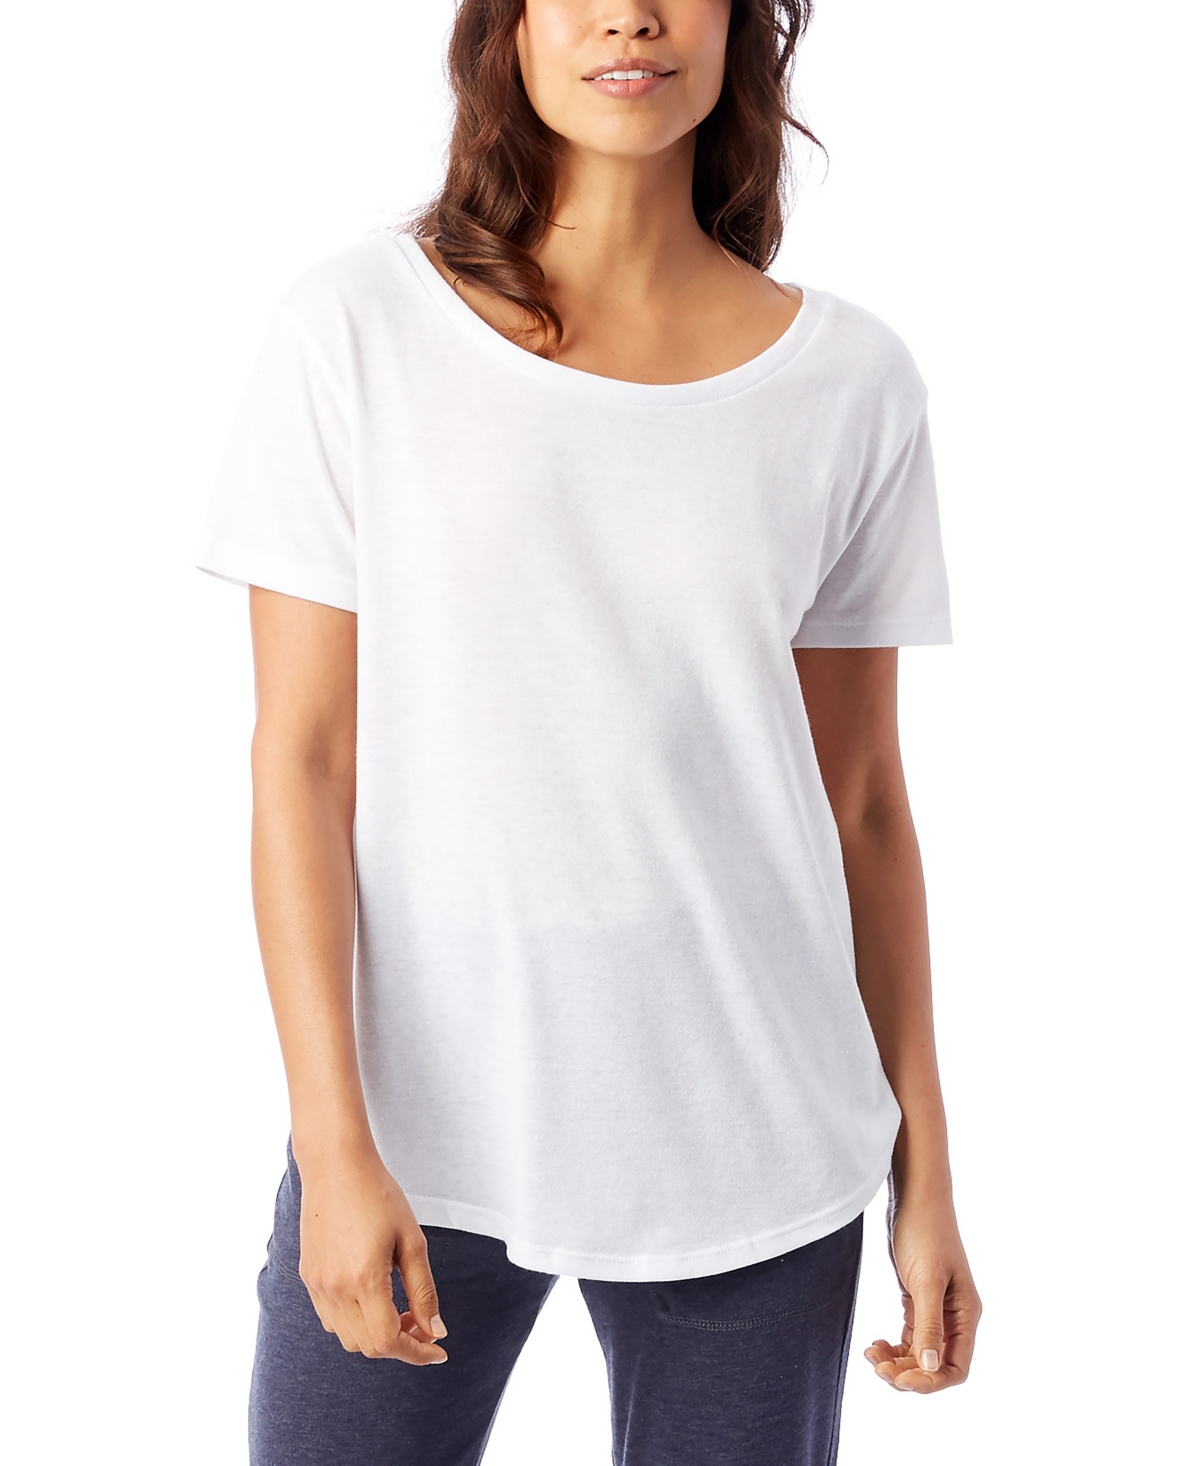 Women's The Backstage T-shirt - White